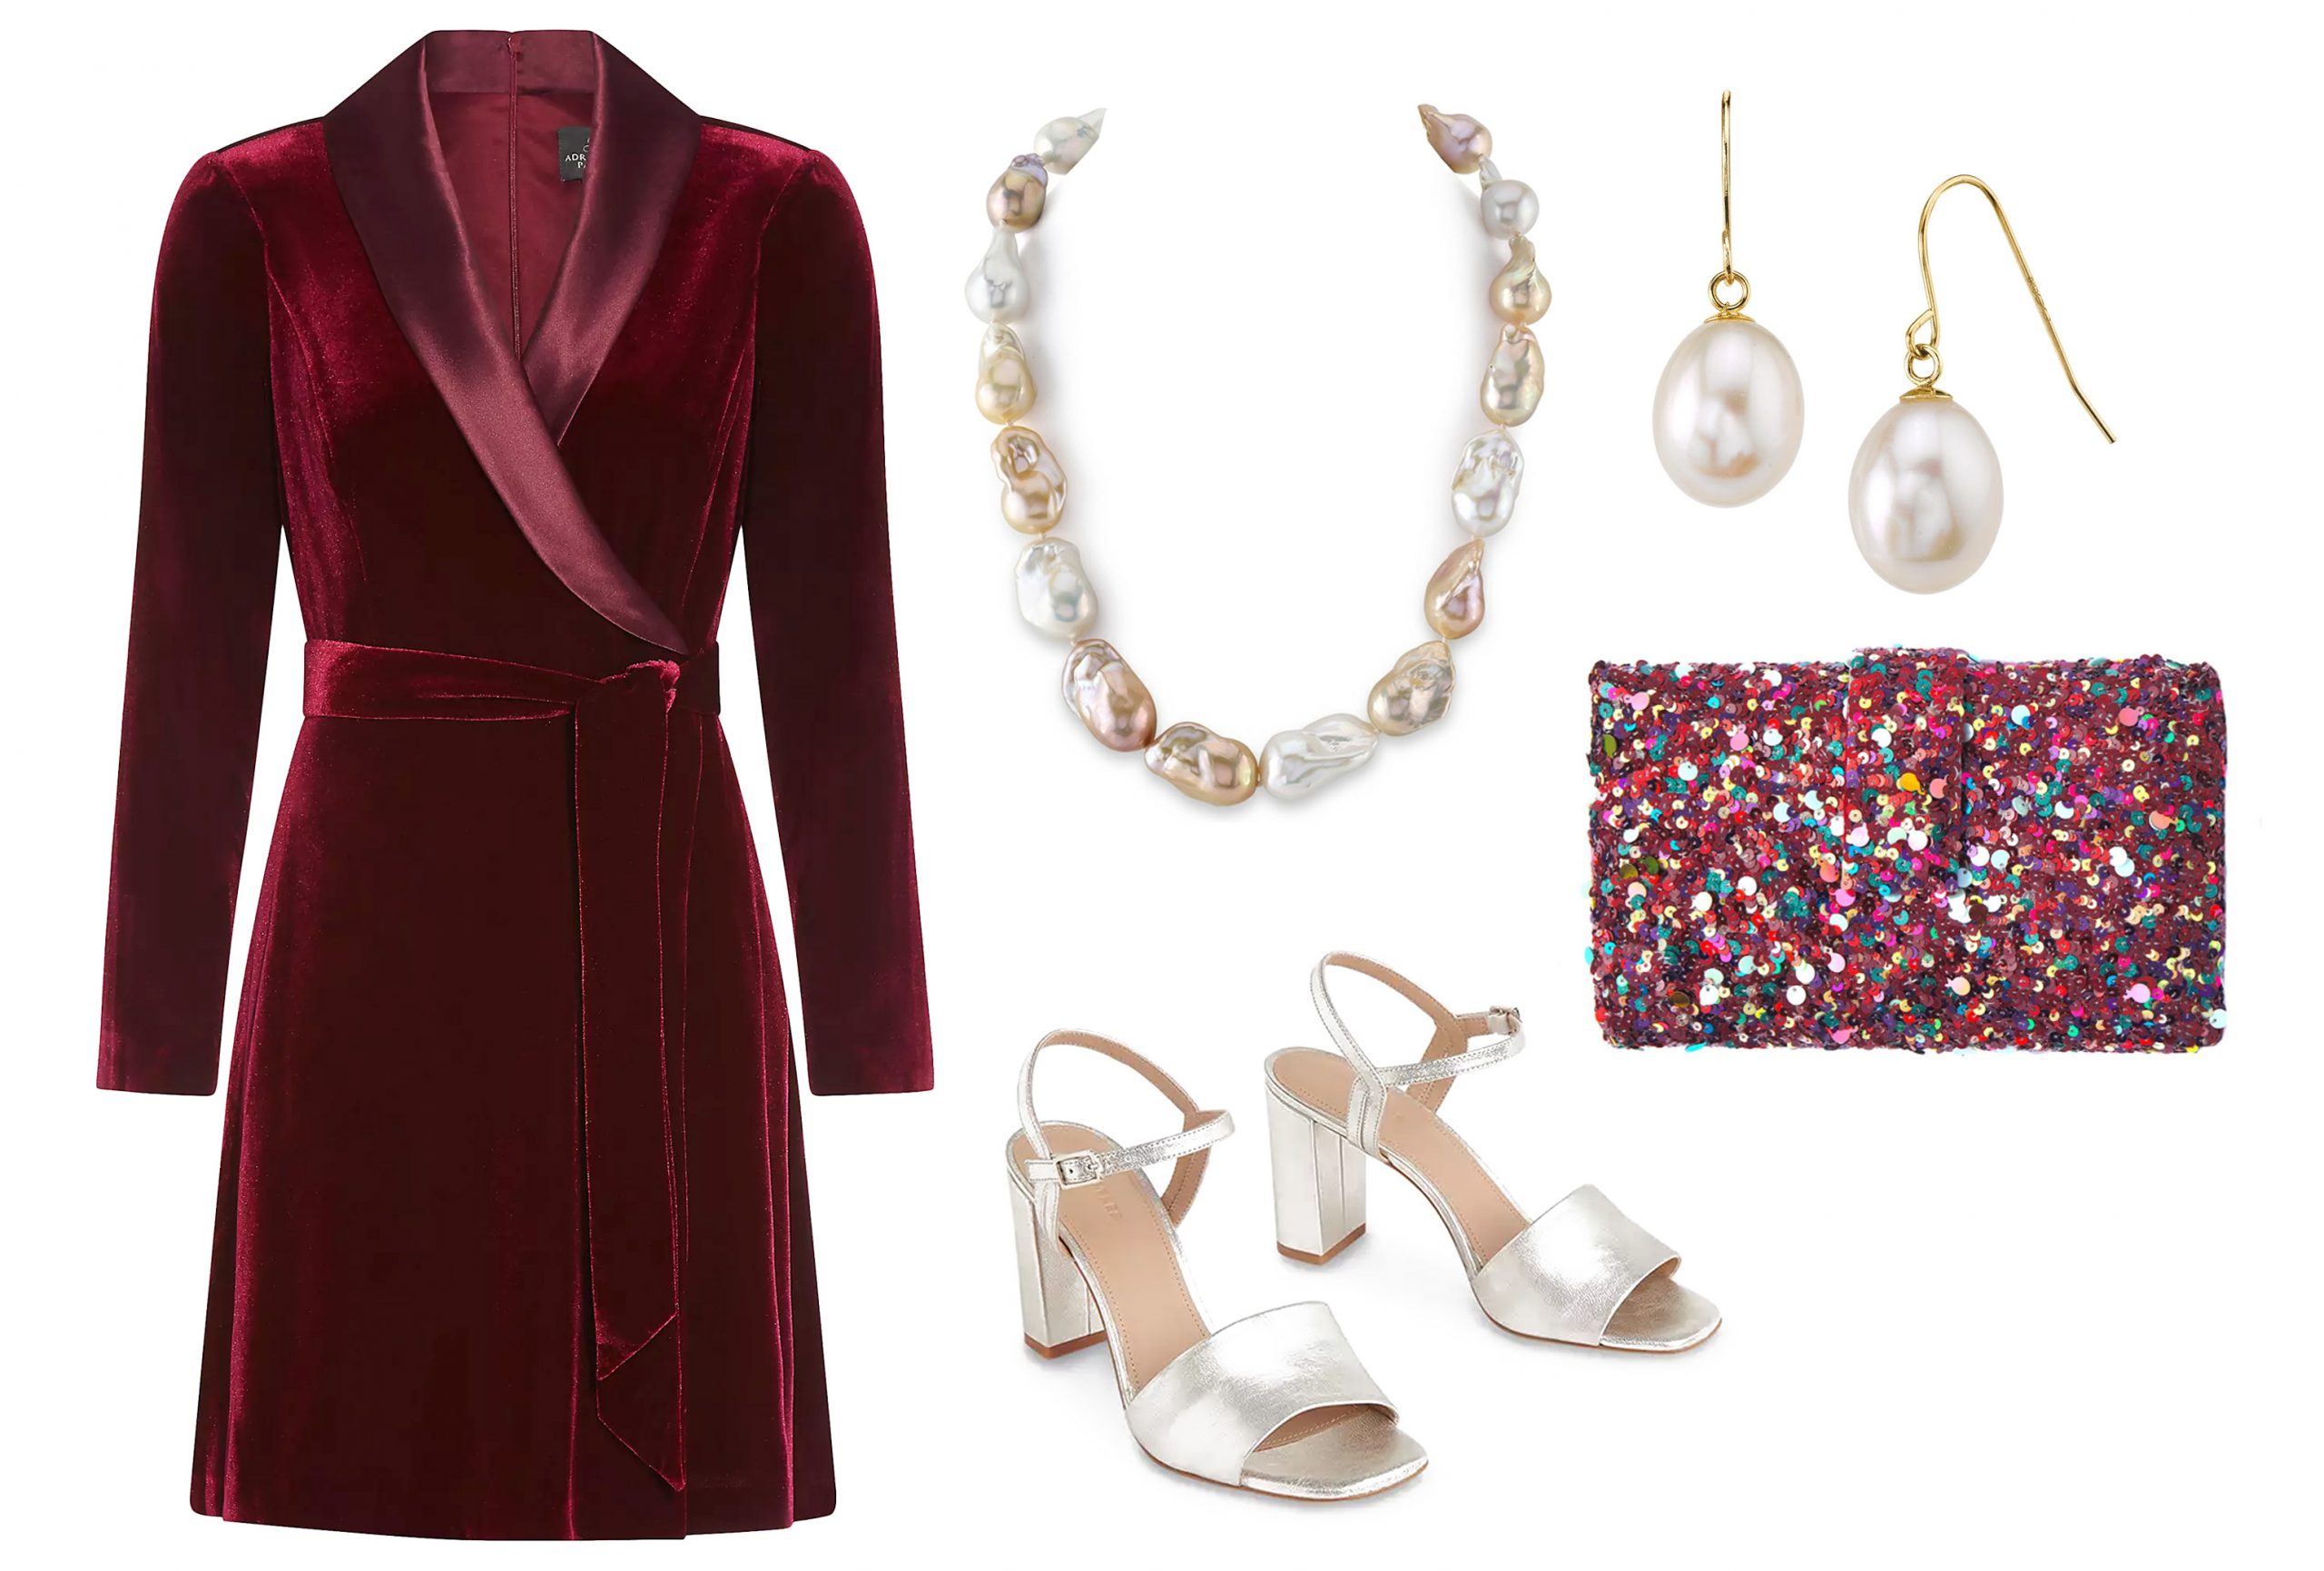 Holiday Party Outfits - Velvet and Metallics, Christmas Party